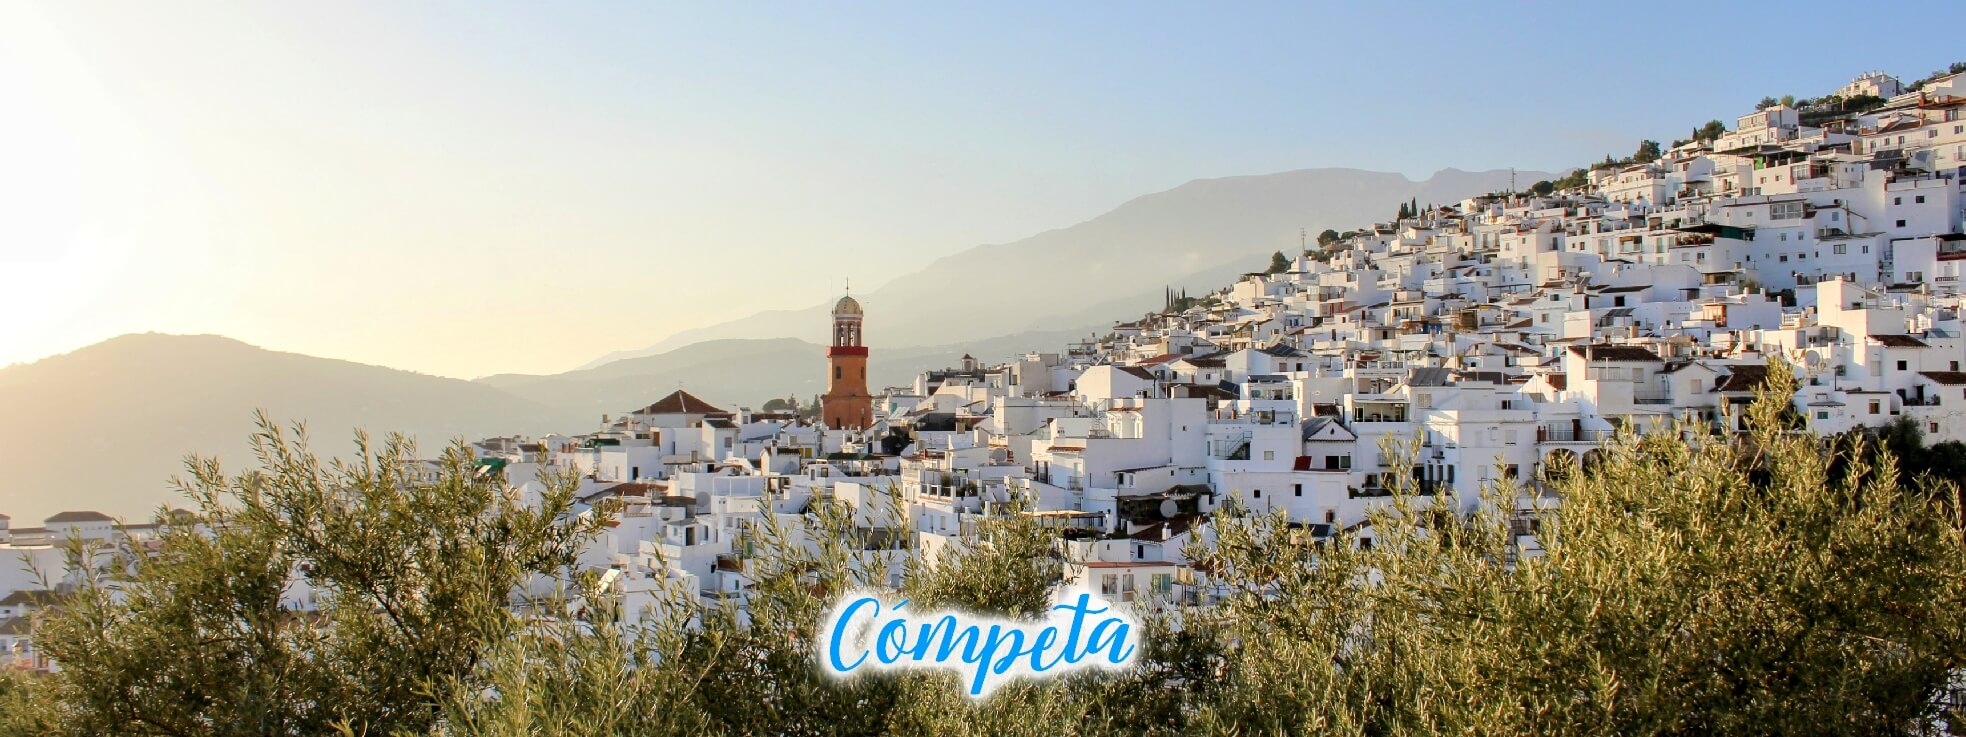 What to visit in Competa Malaga